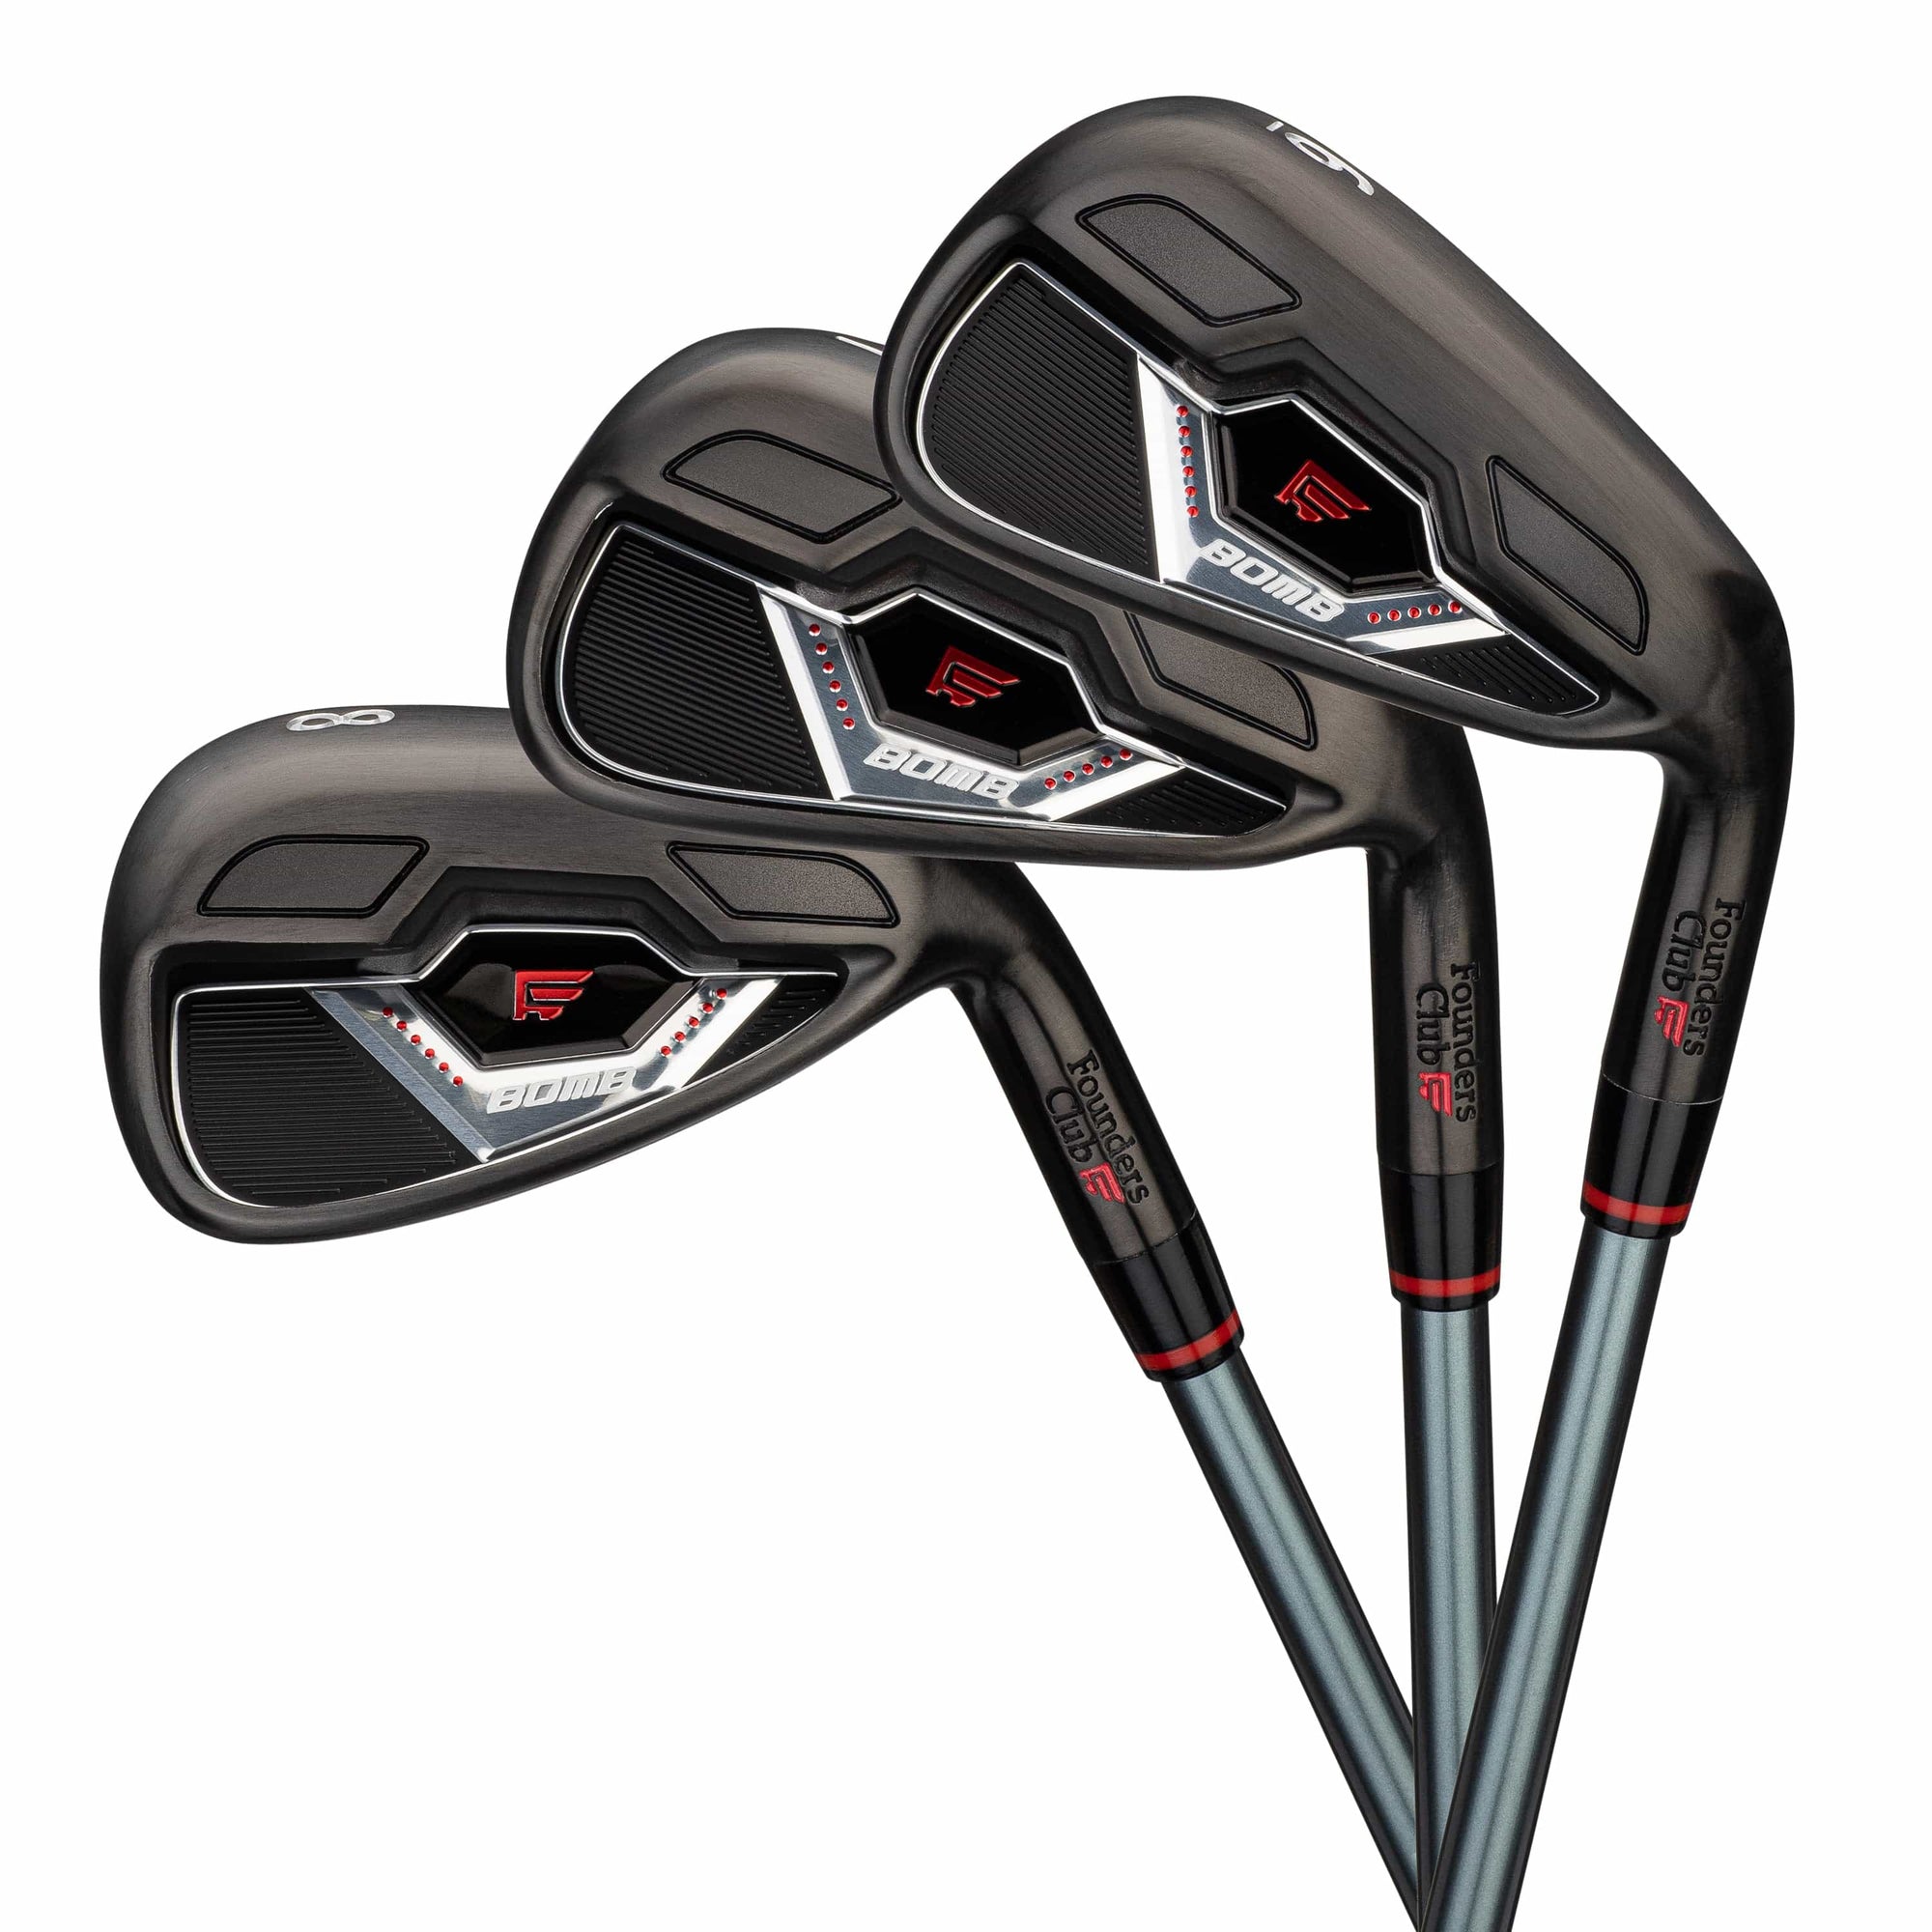 Irons and Hybrids - Founders Club